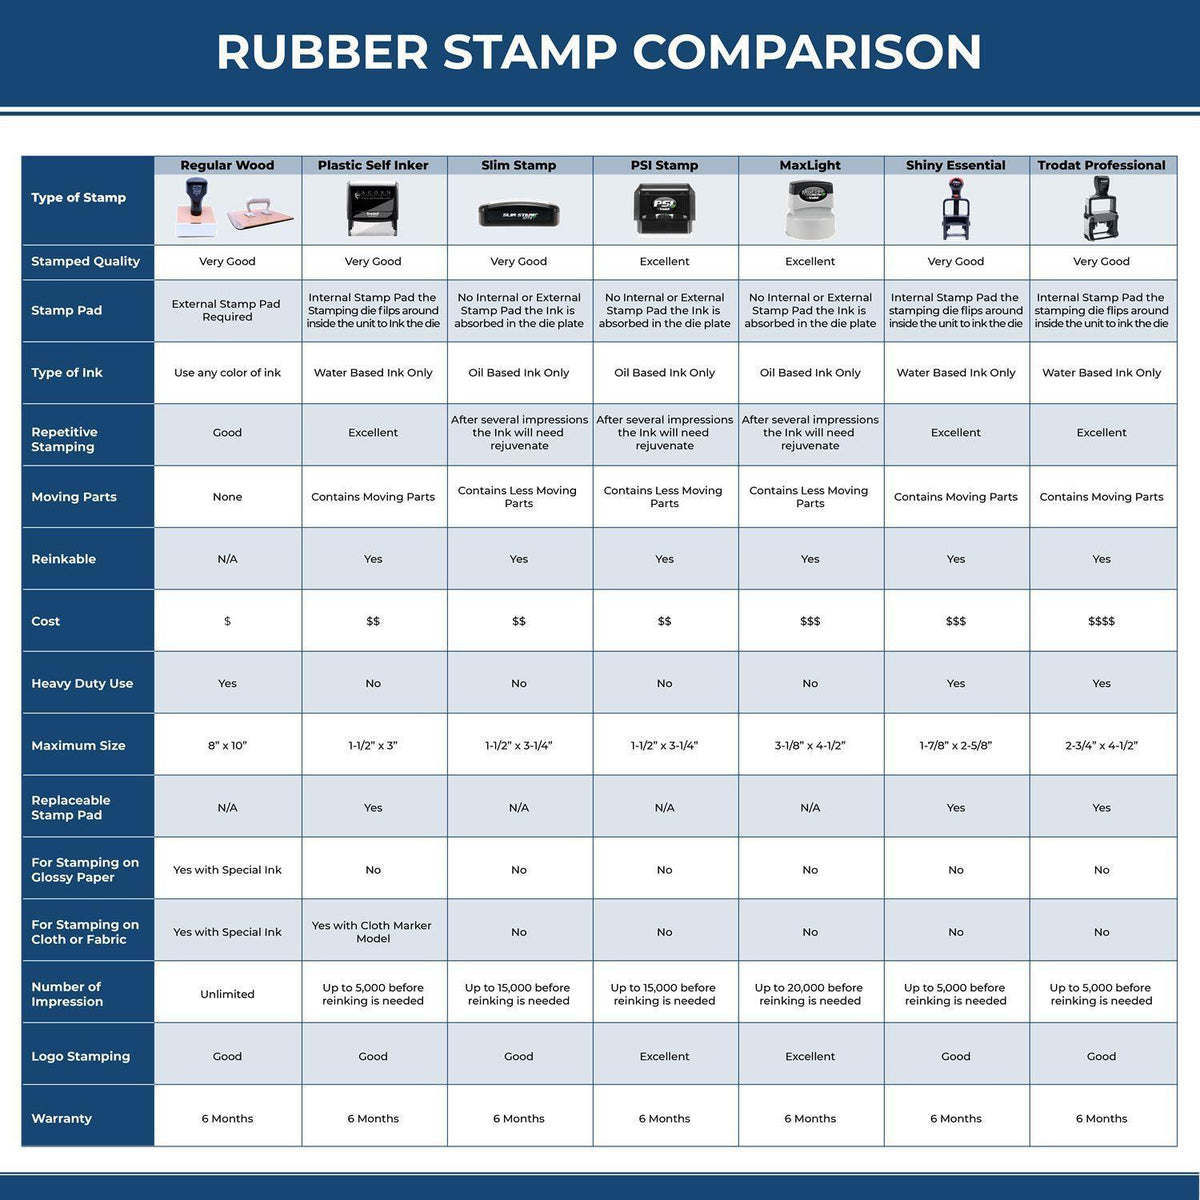 Large Pre-Inked Narrow Expedite Stamp 4863SLIM Rubber Stamp Comparison